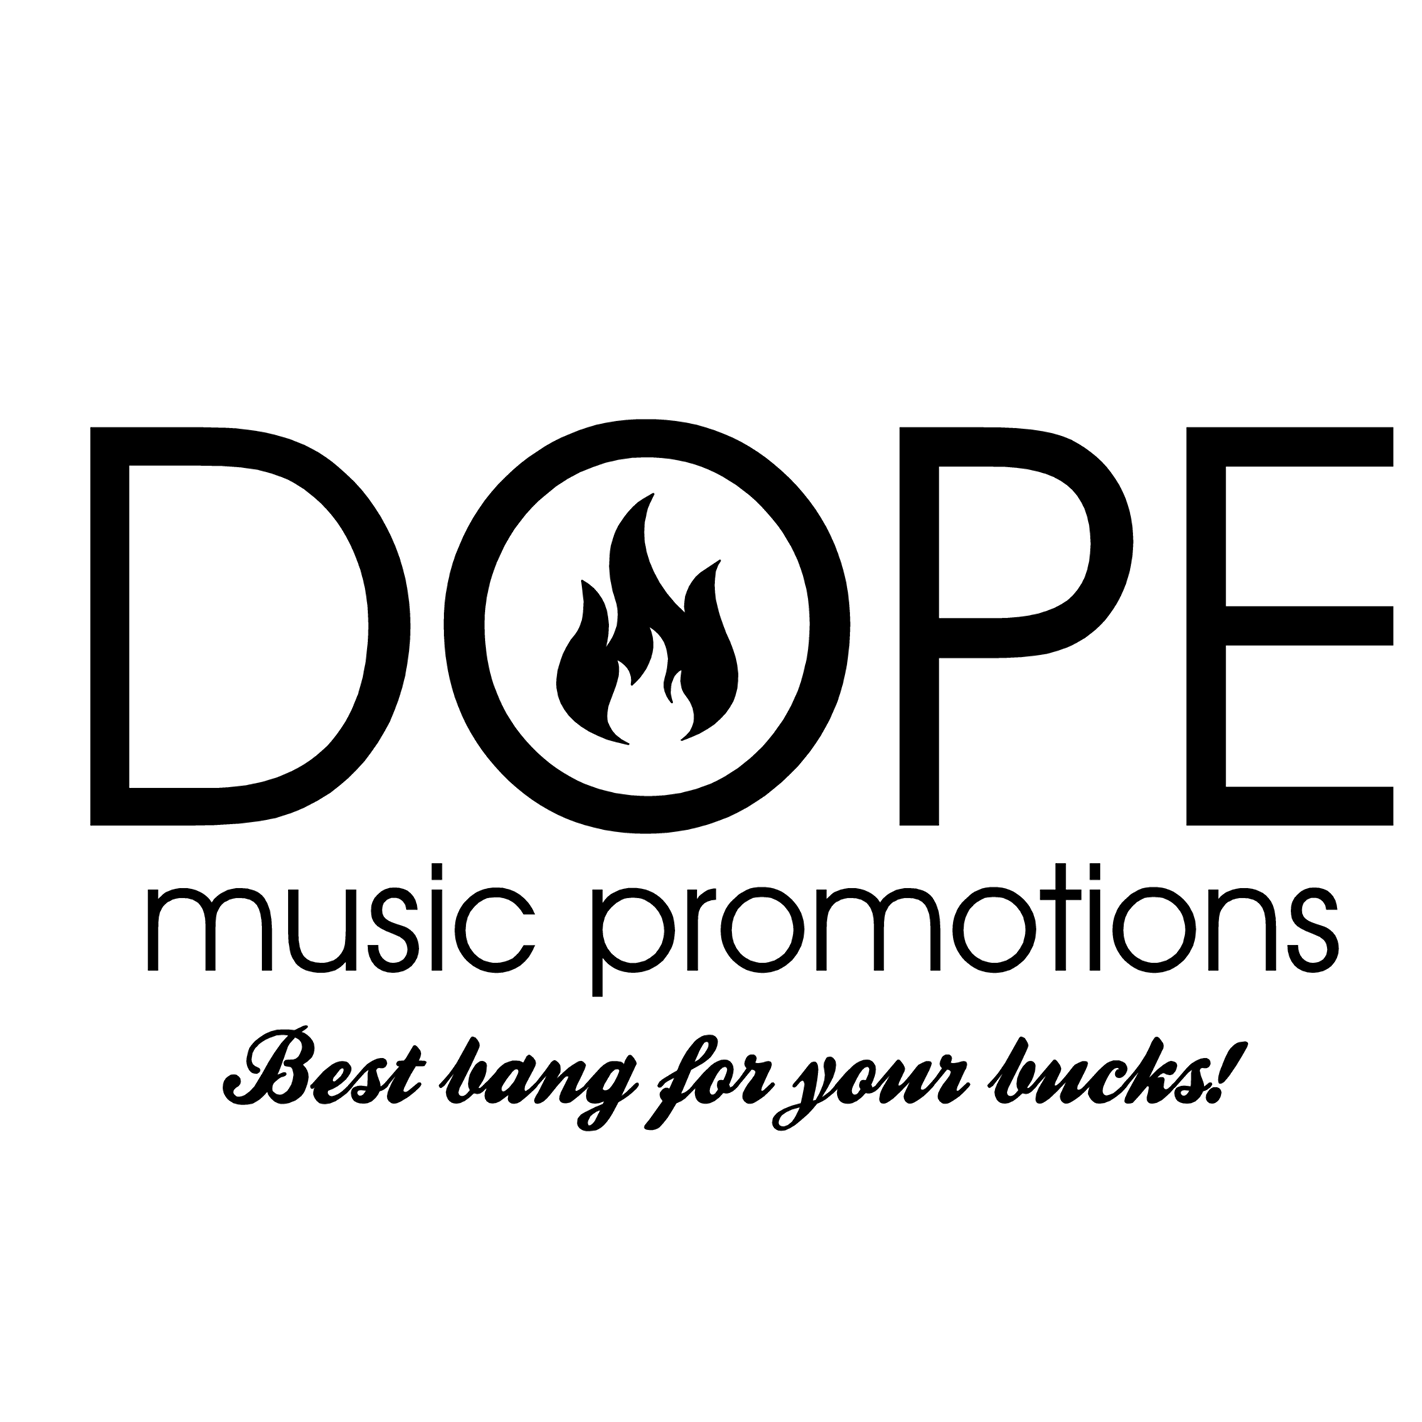 Dope Music Promotions